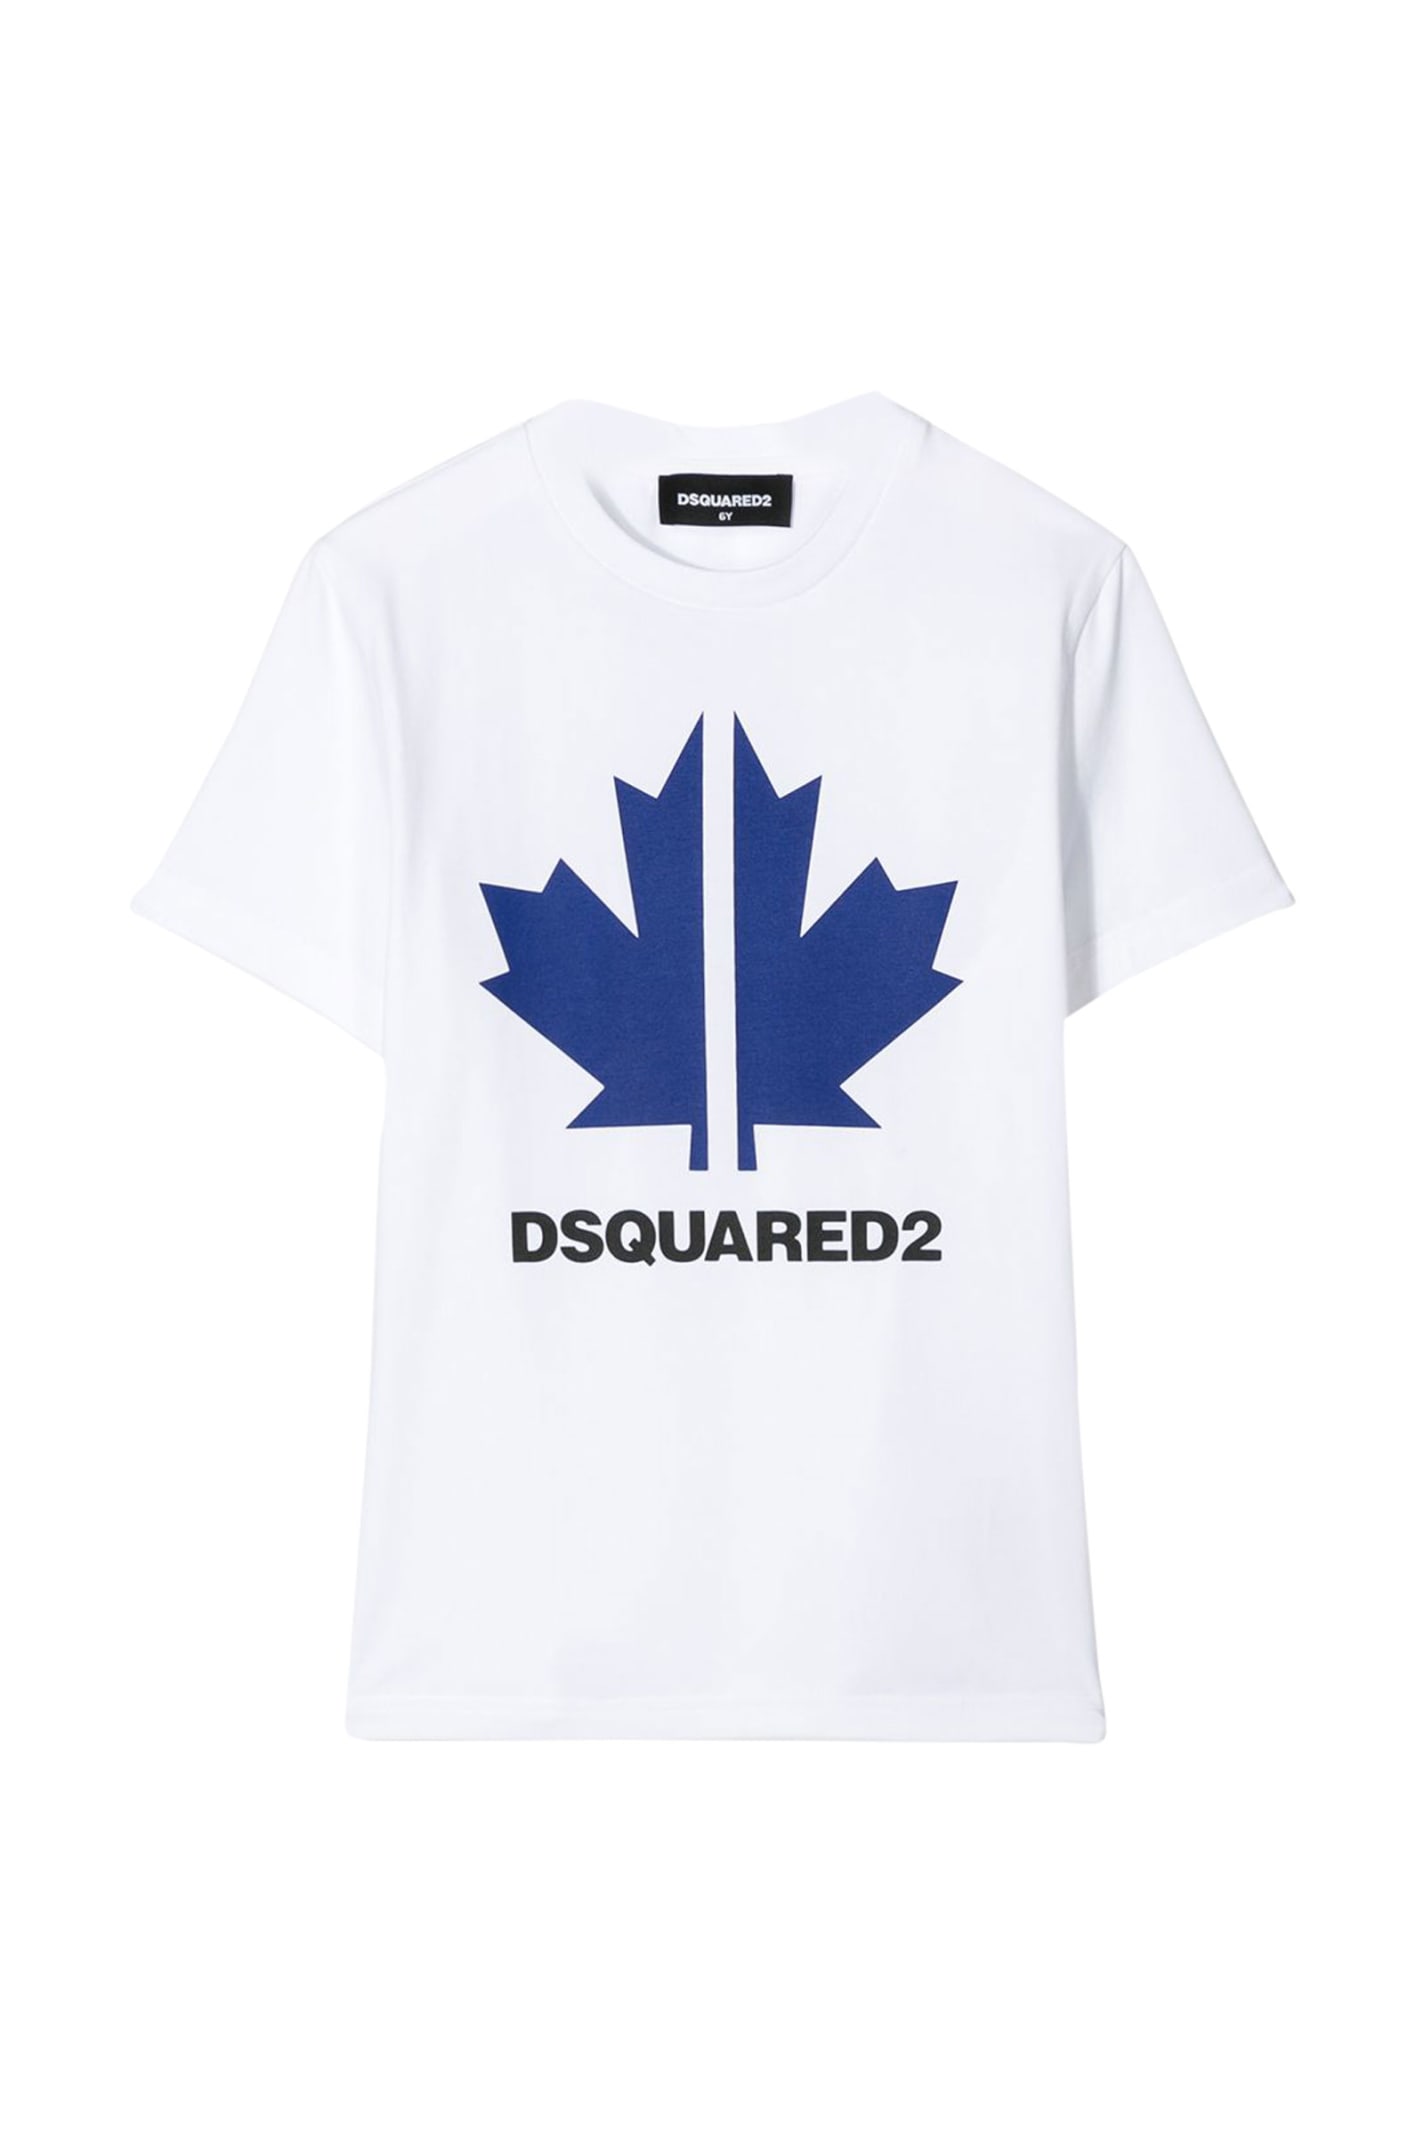 DSQUARED2 KIDS T-SHIRT WITH PRINT,11205775